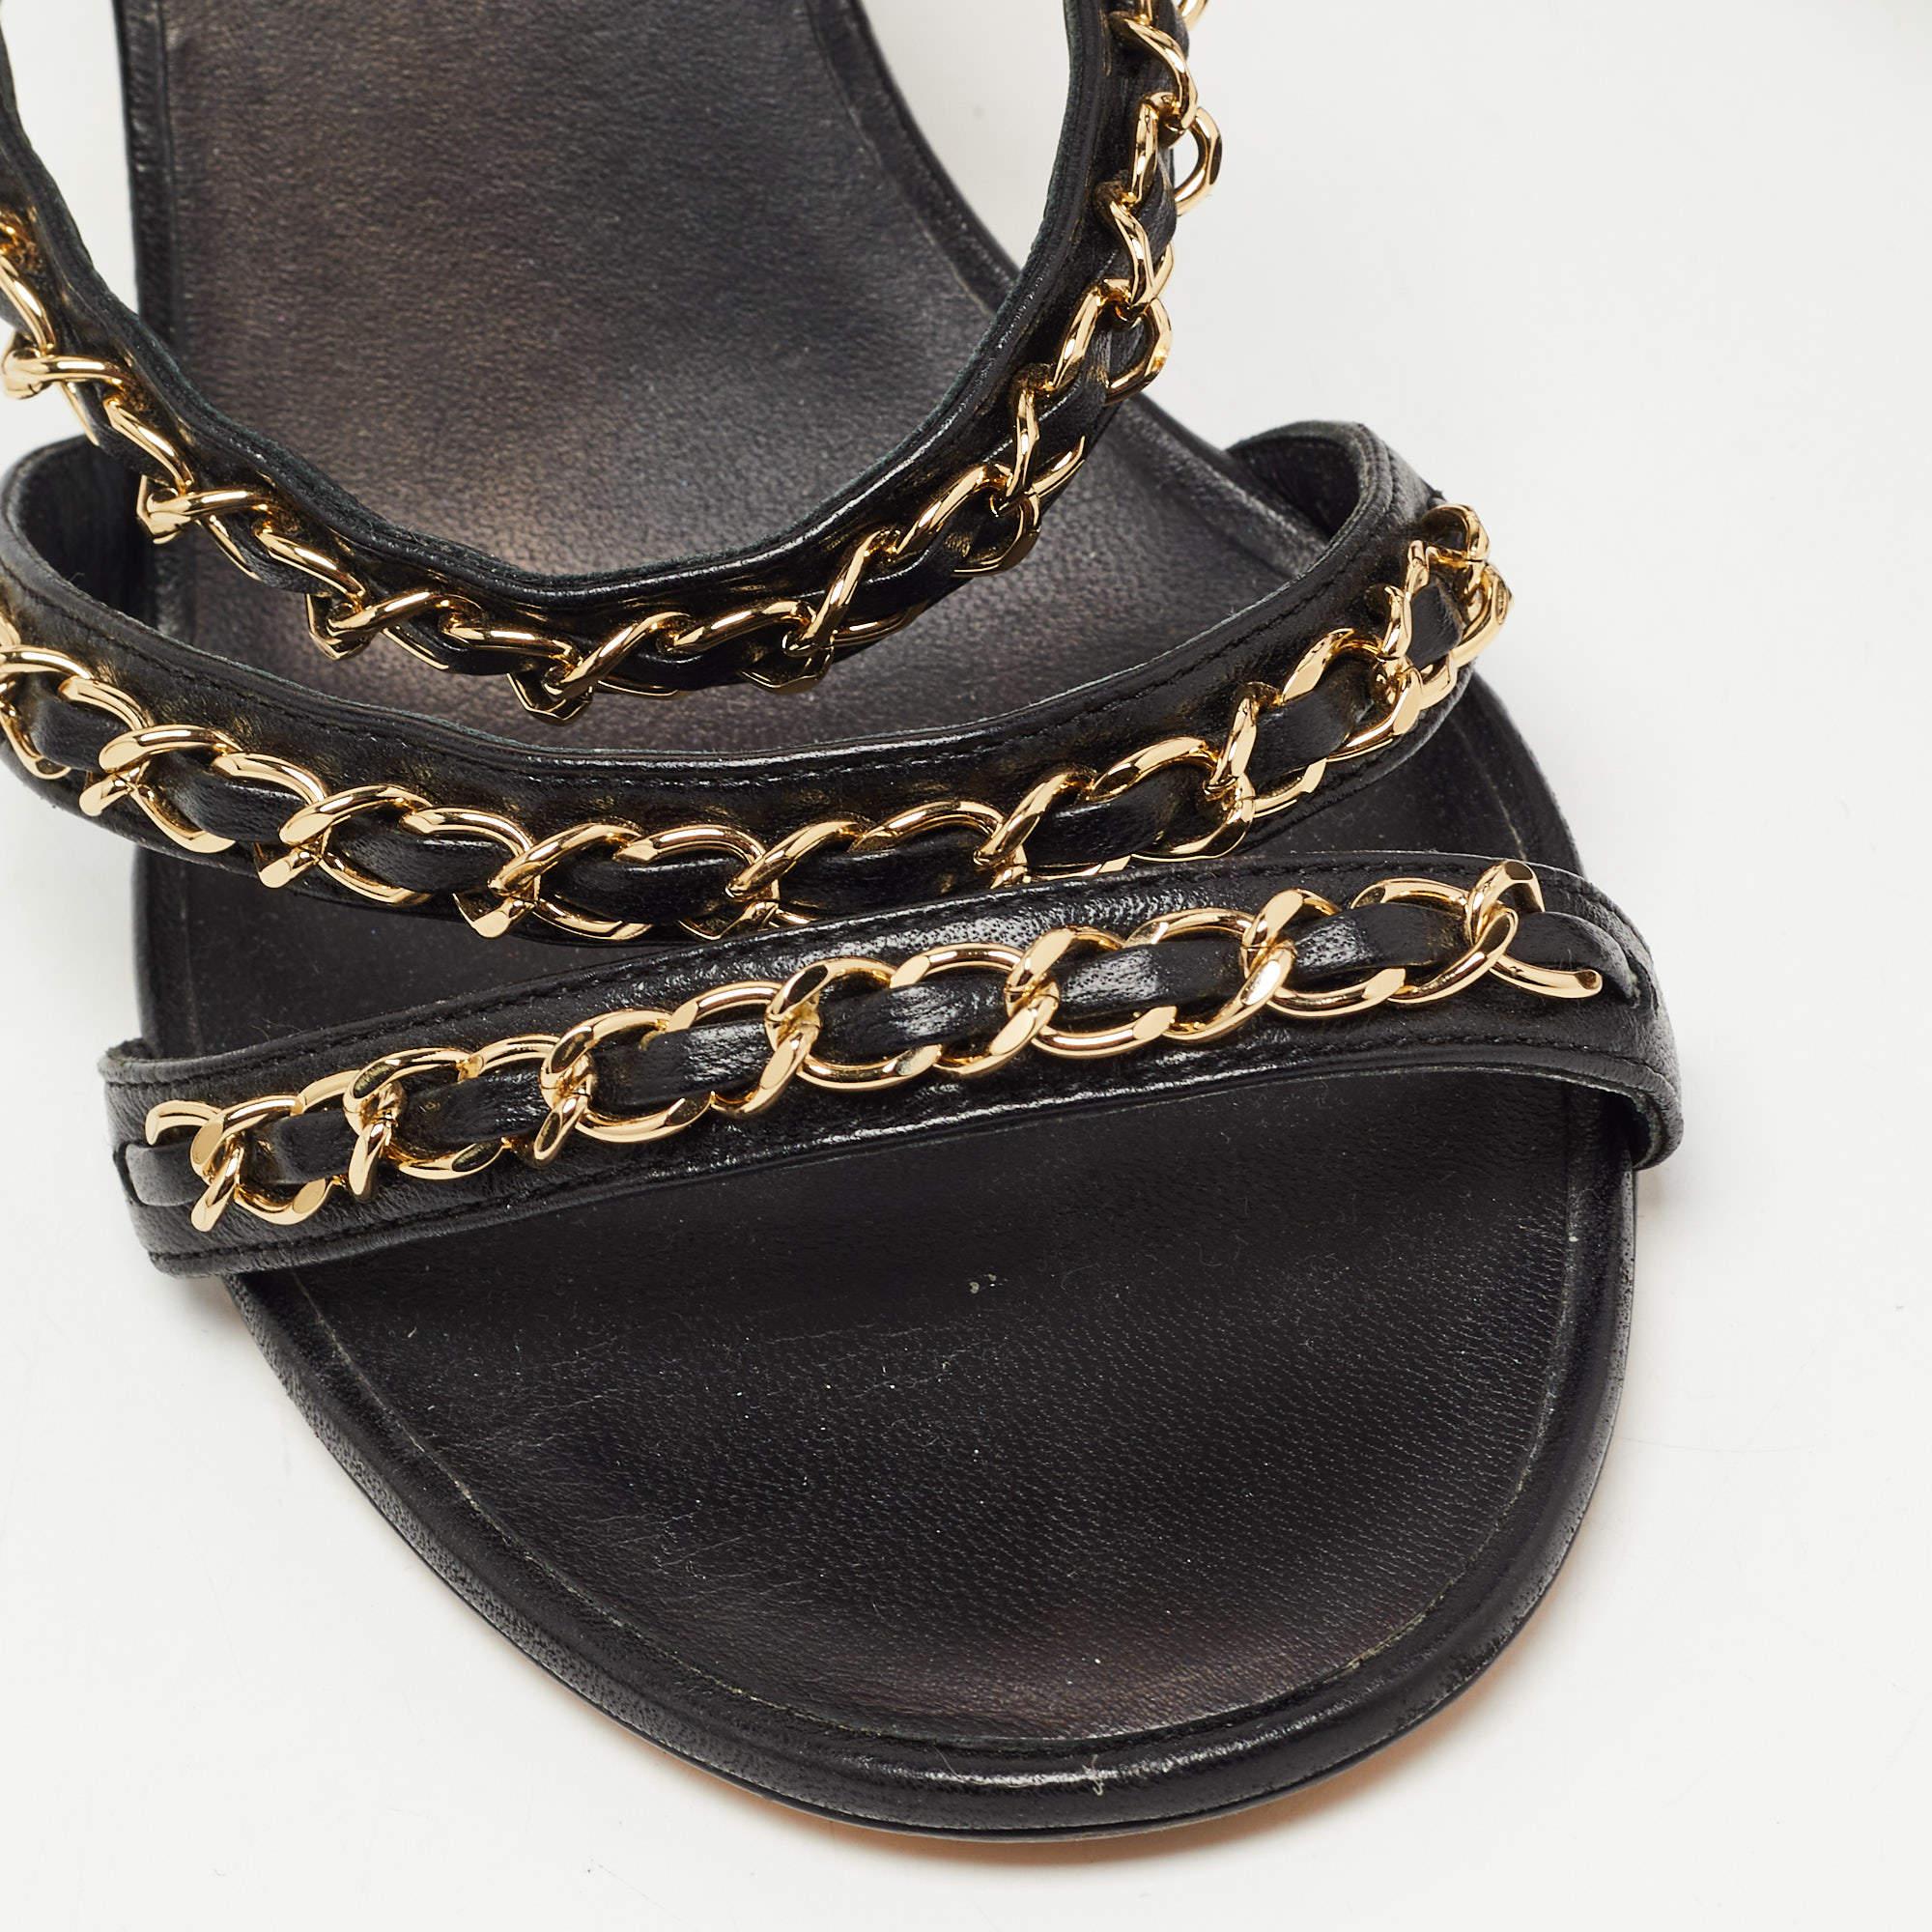 Chanel Black Leather CC Chain Detail Strappy Sandals Size 37 4